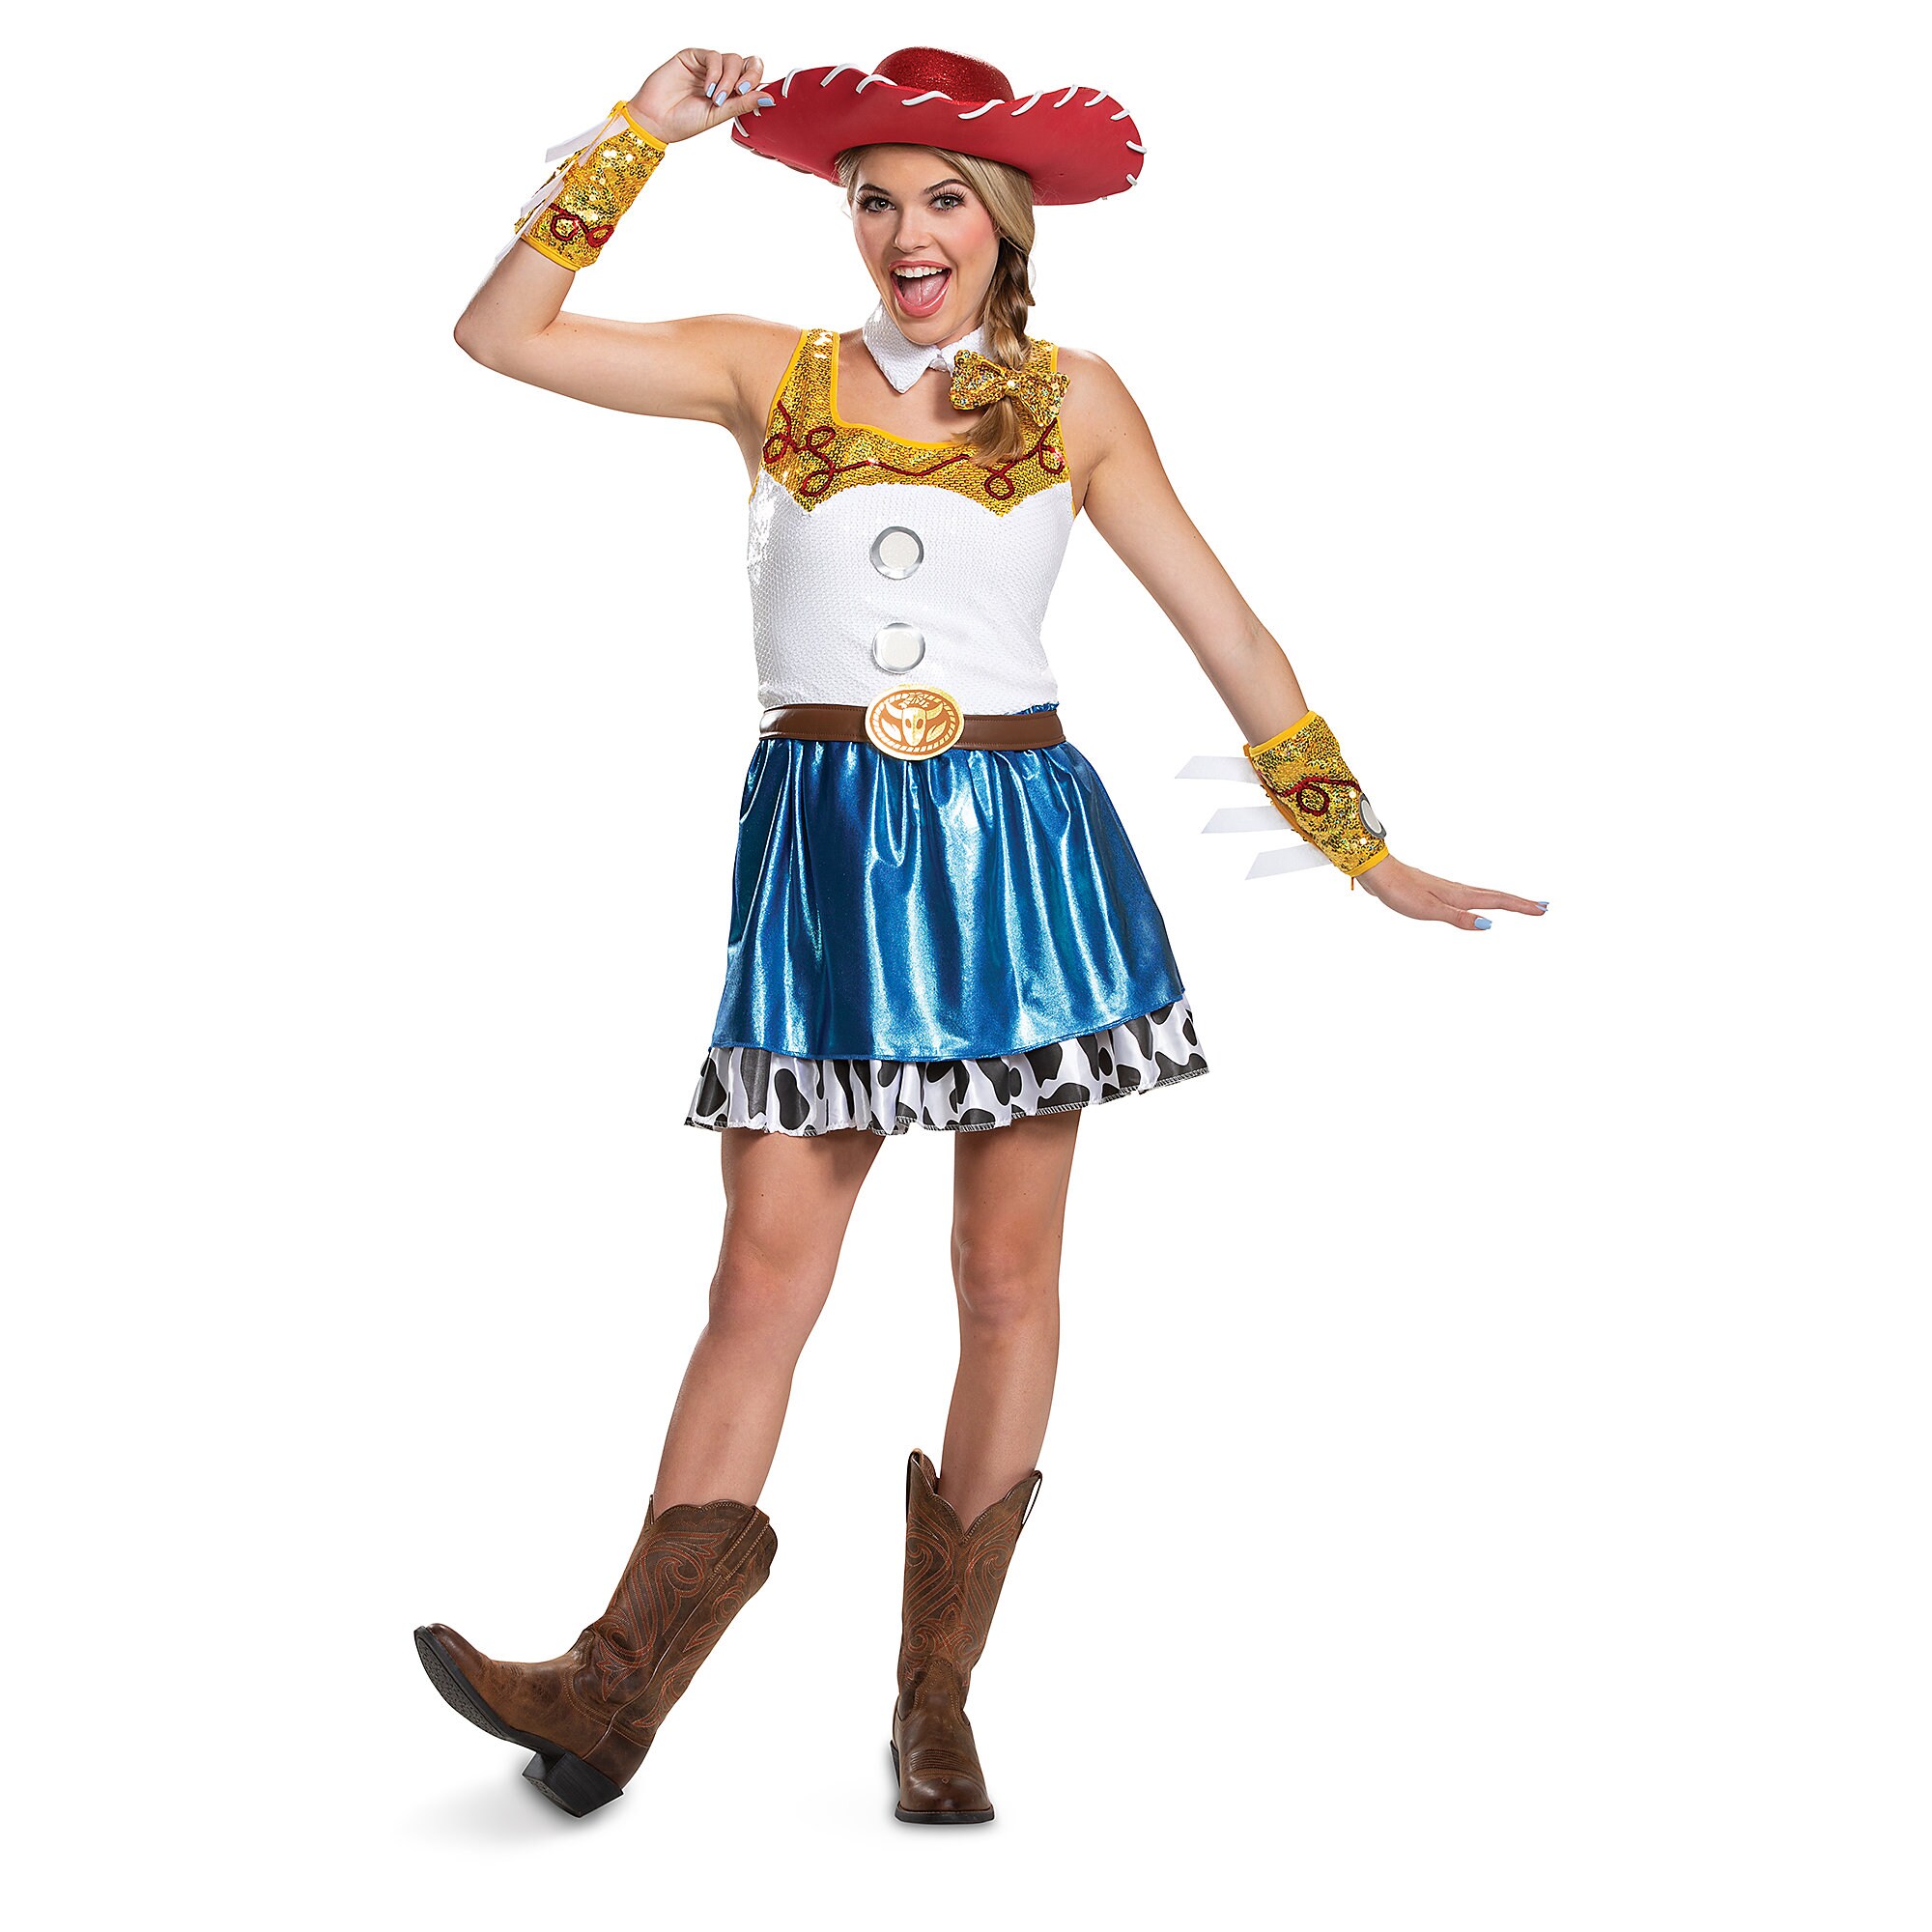 Jessie Dress Costume for Adults by Disguise - Toy Story now out for ...